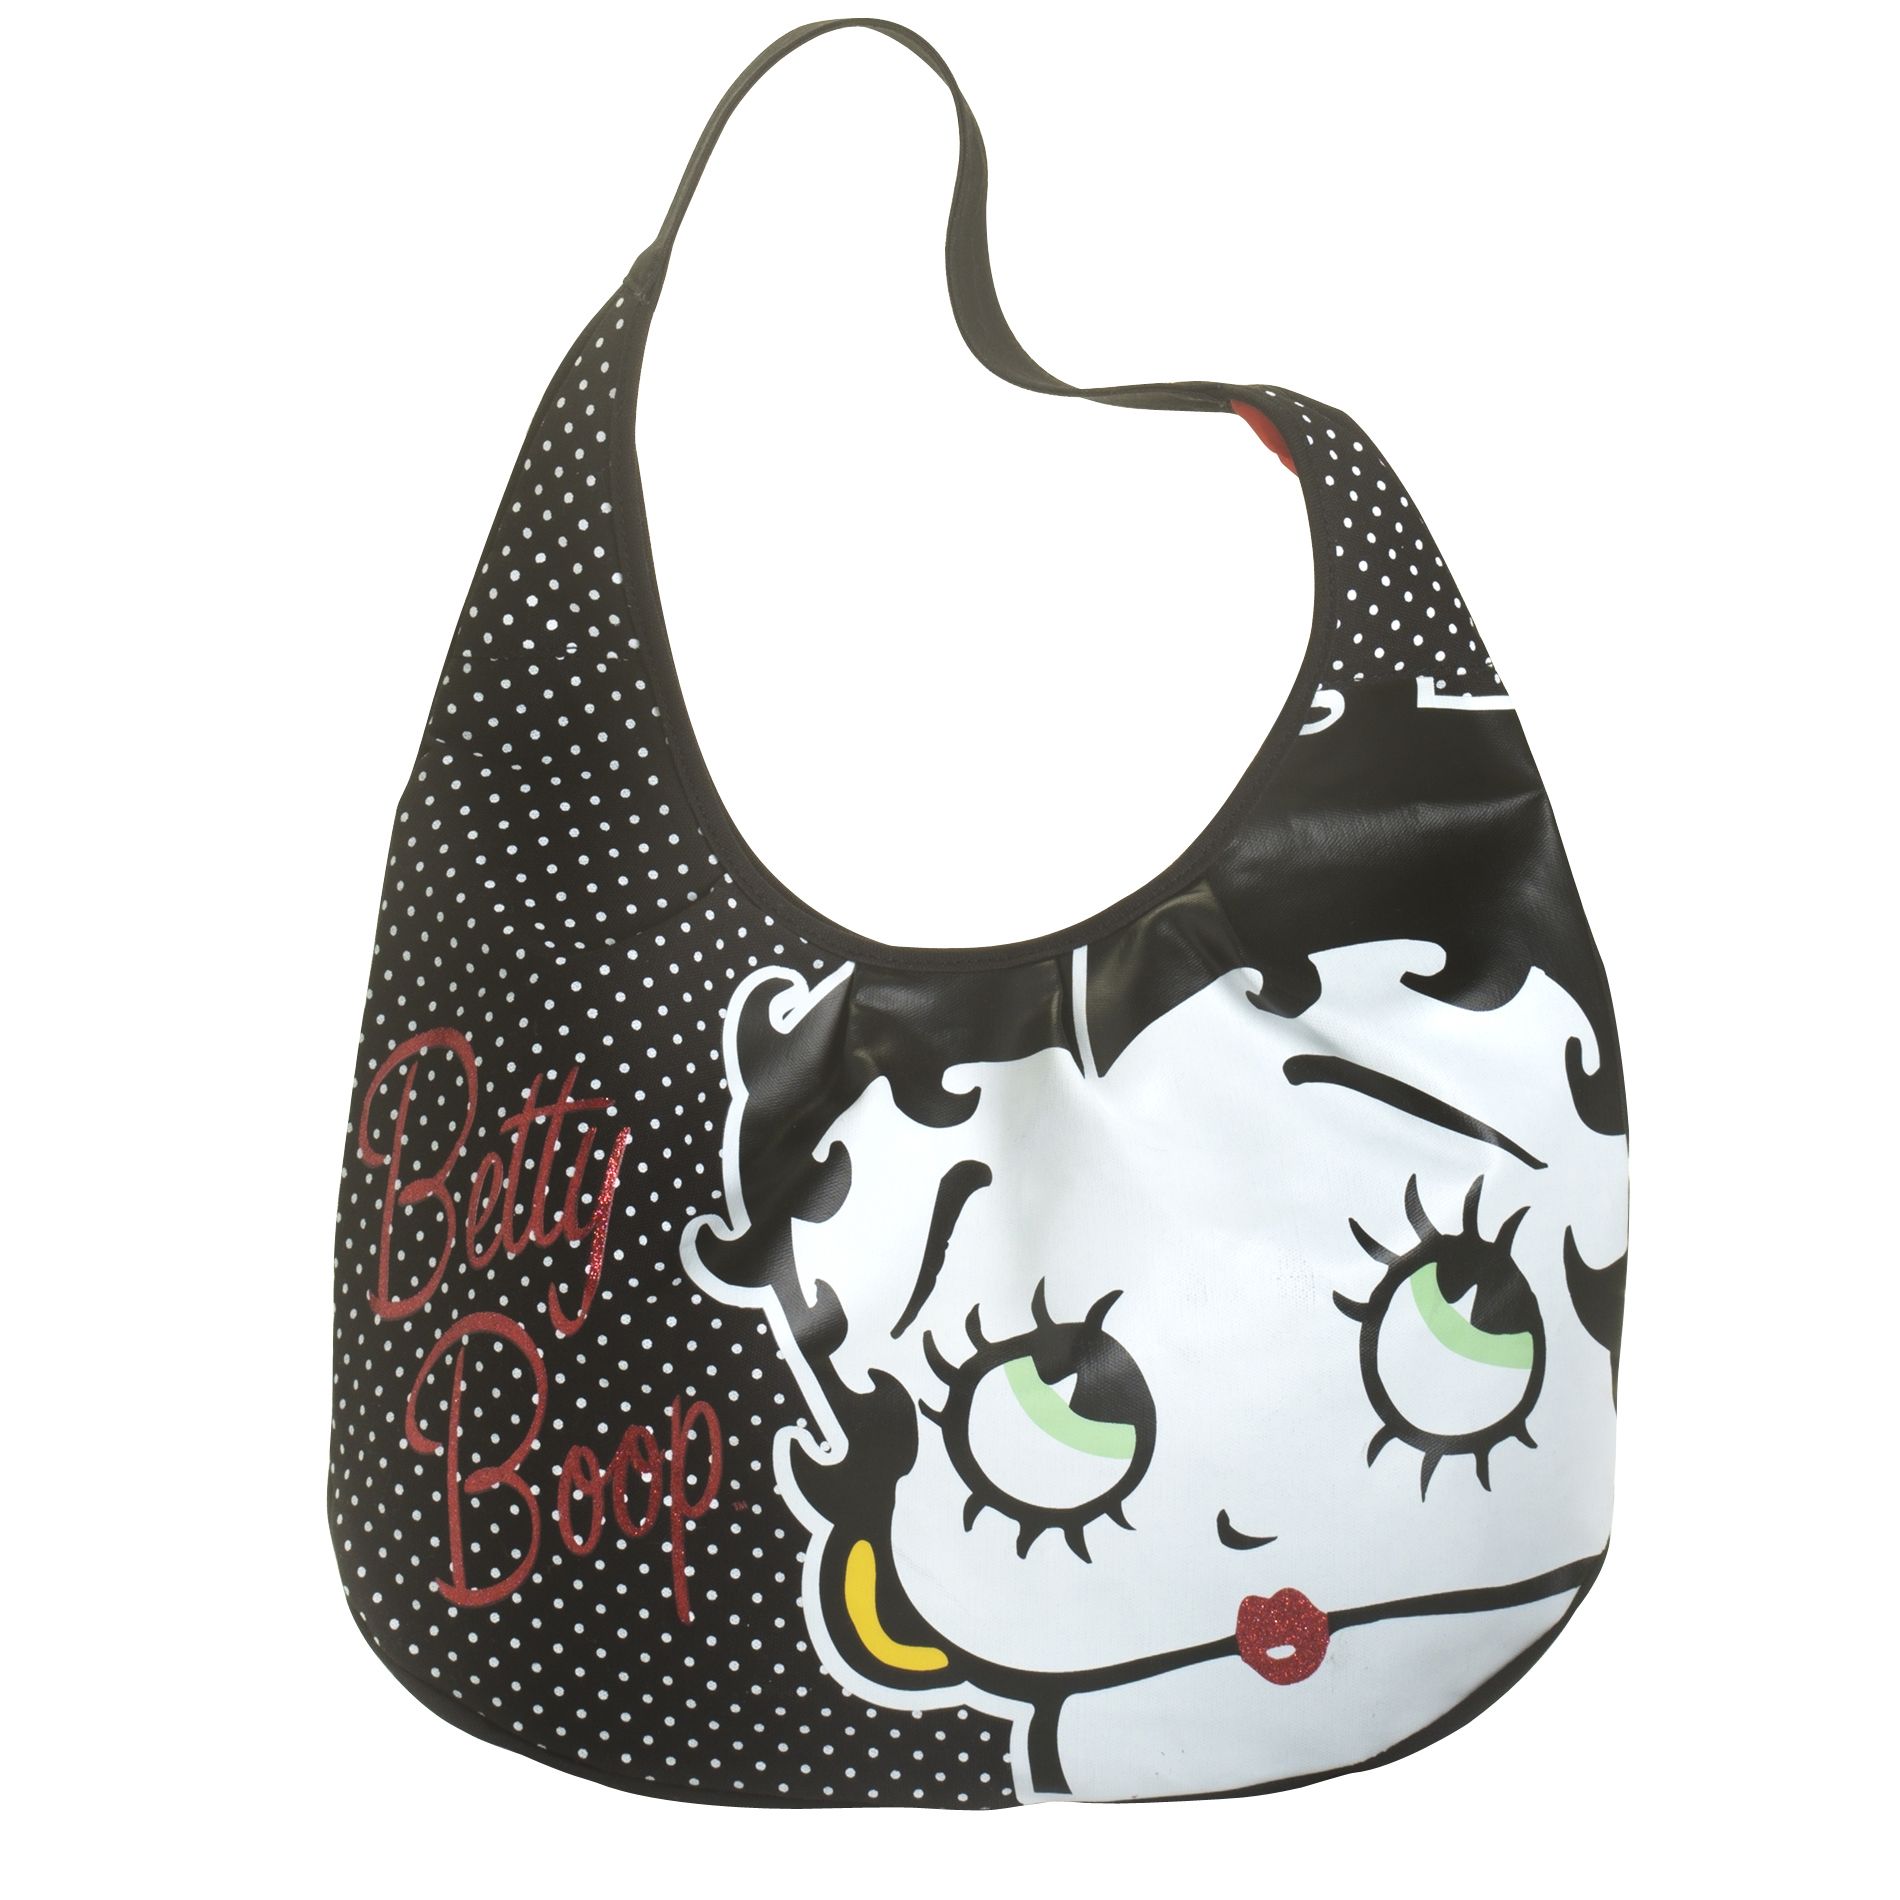 Betty Boop Sparkle Autograph Graphic Hobo Bag